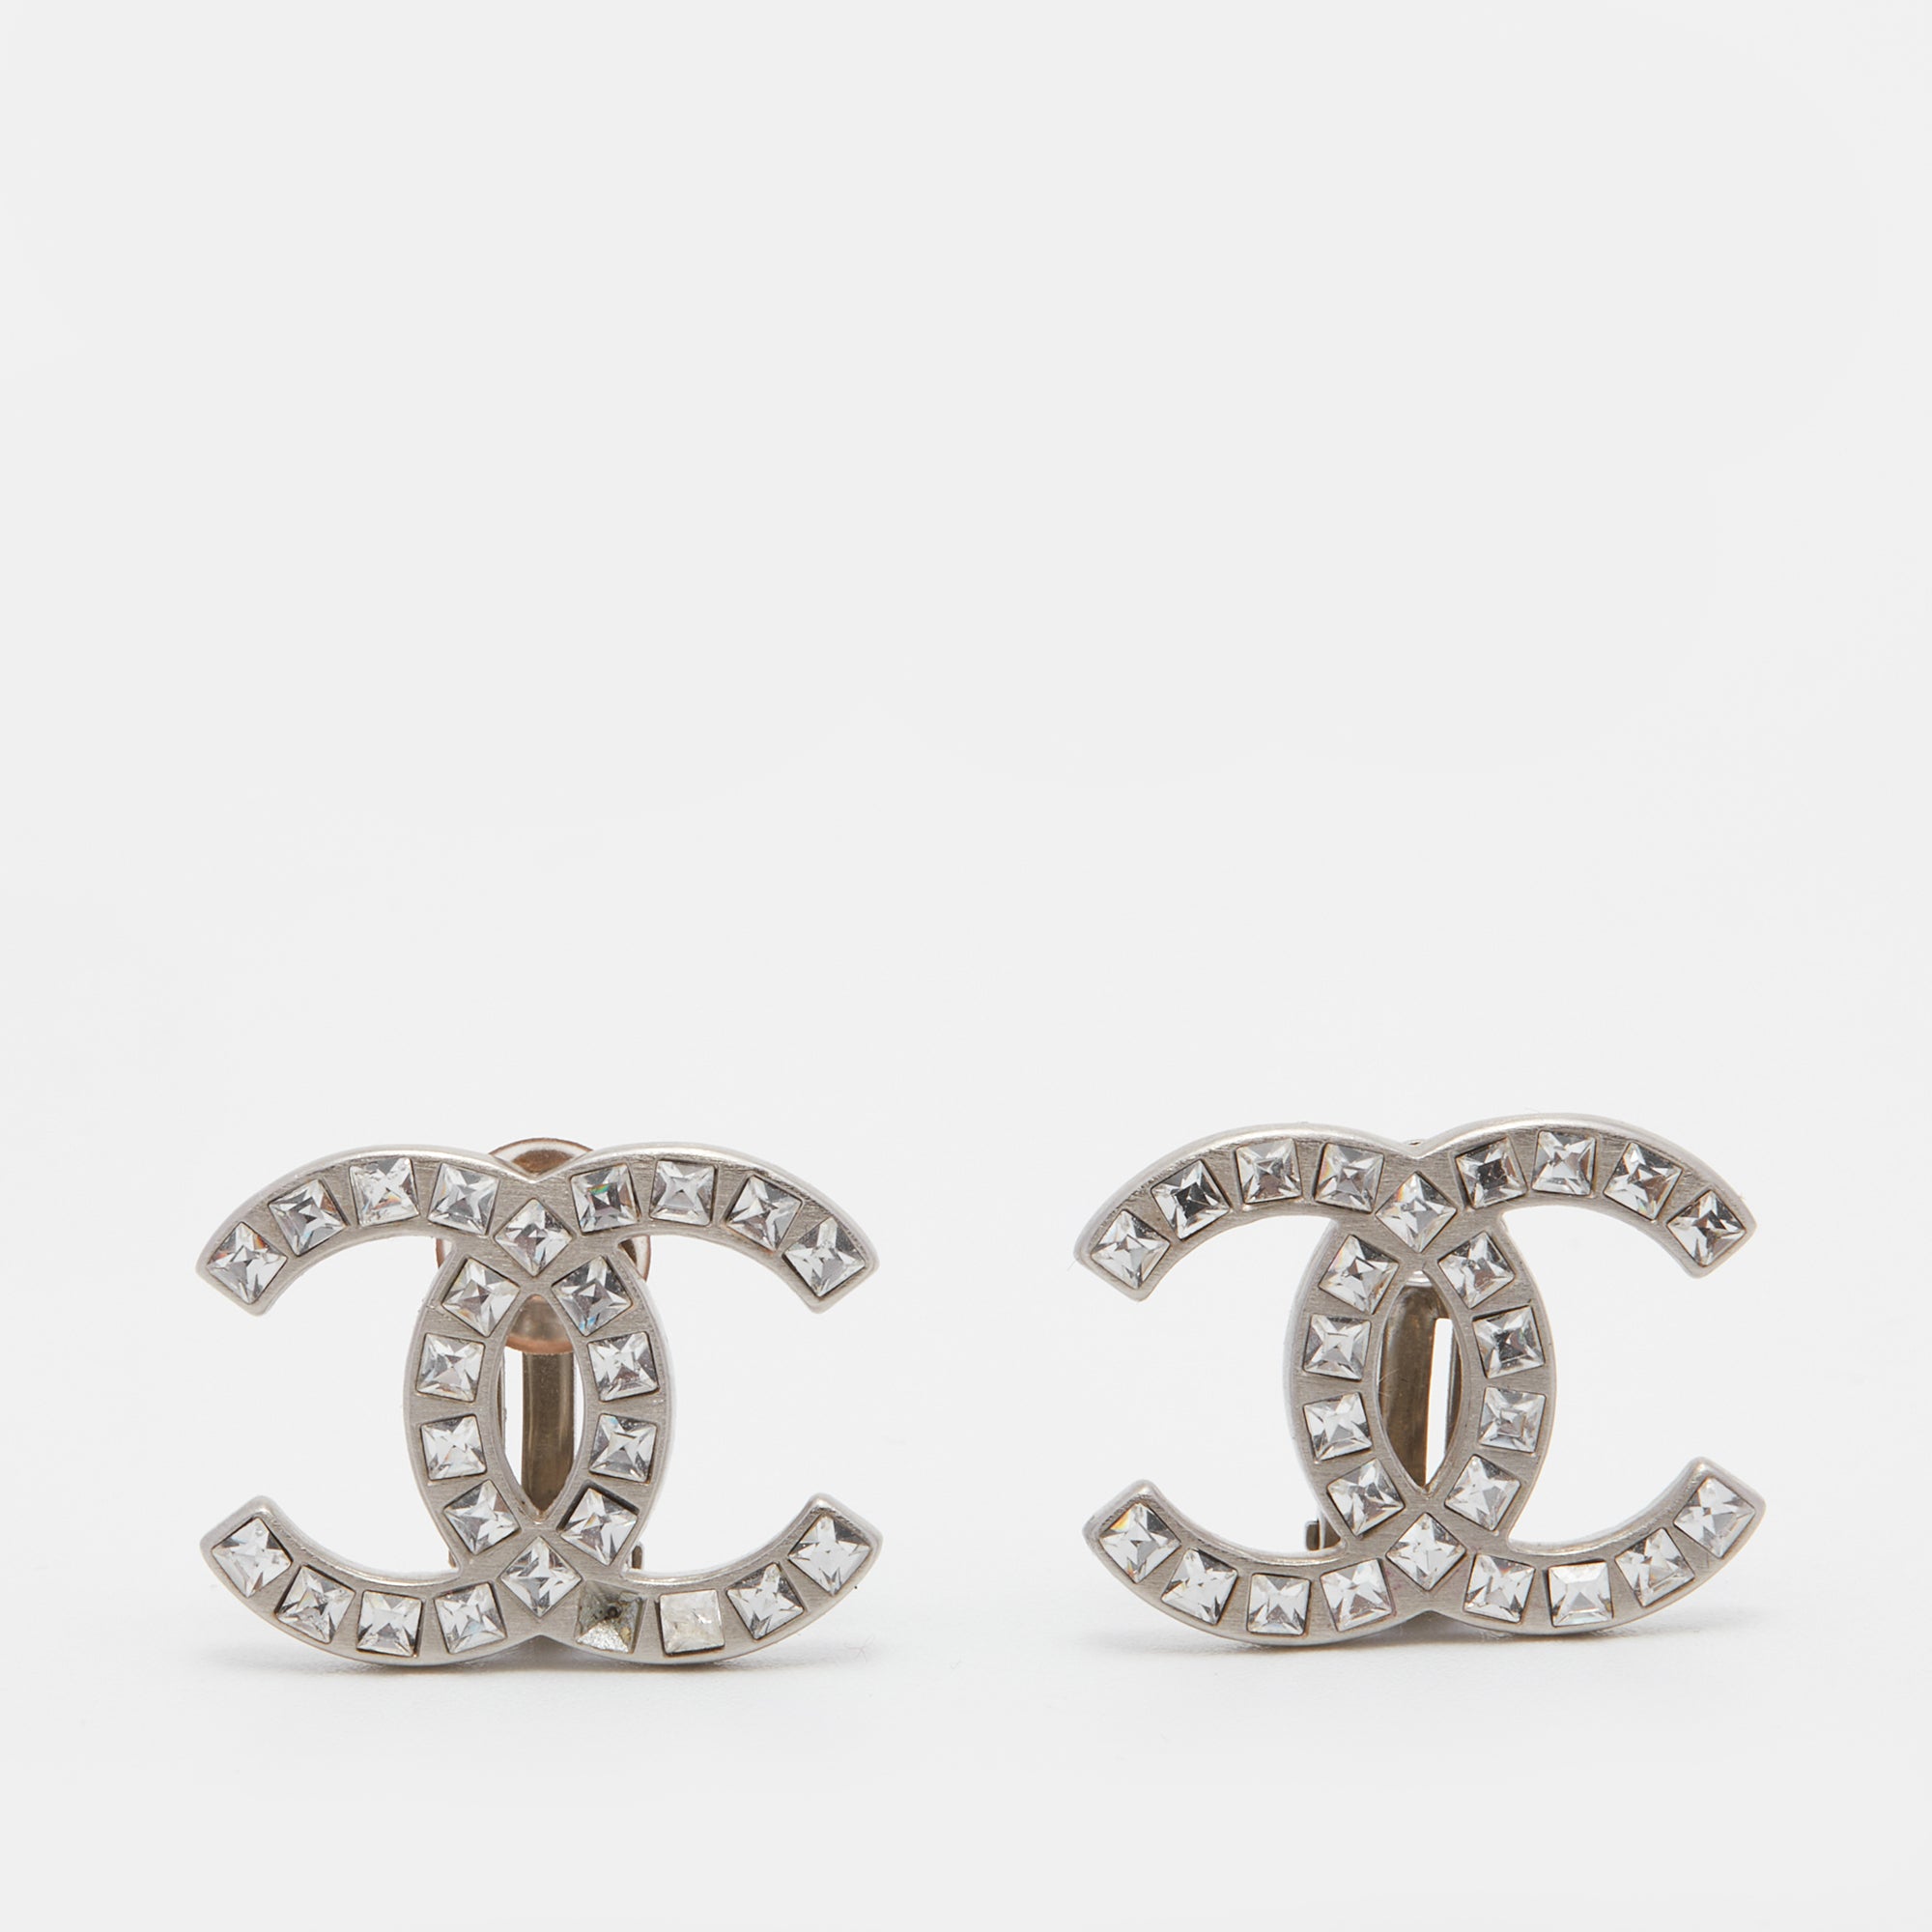 Search results for: 'chanel logo earrings